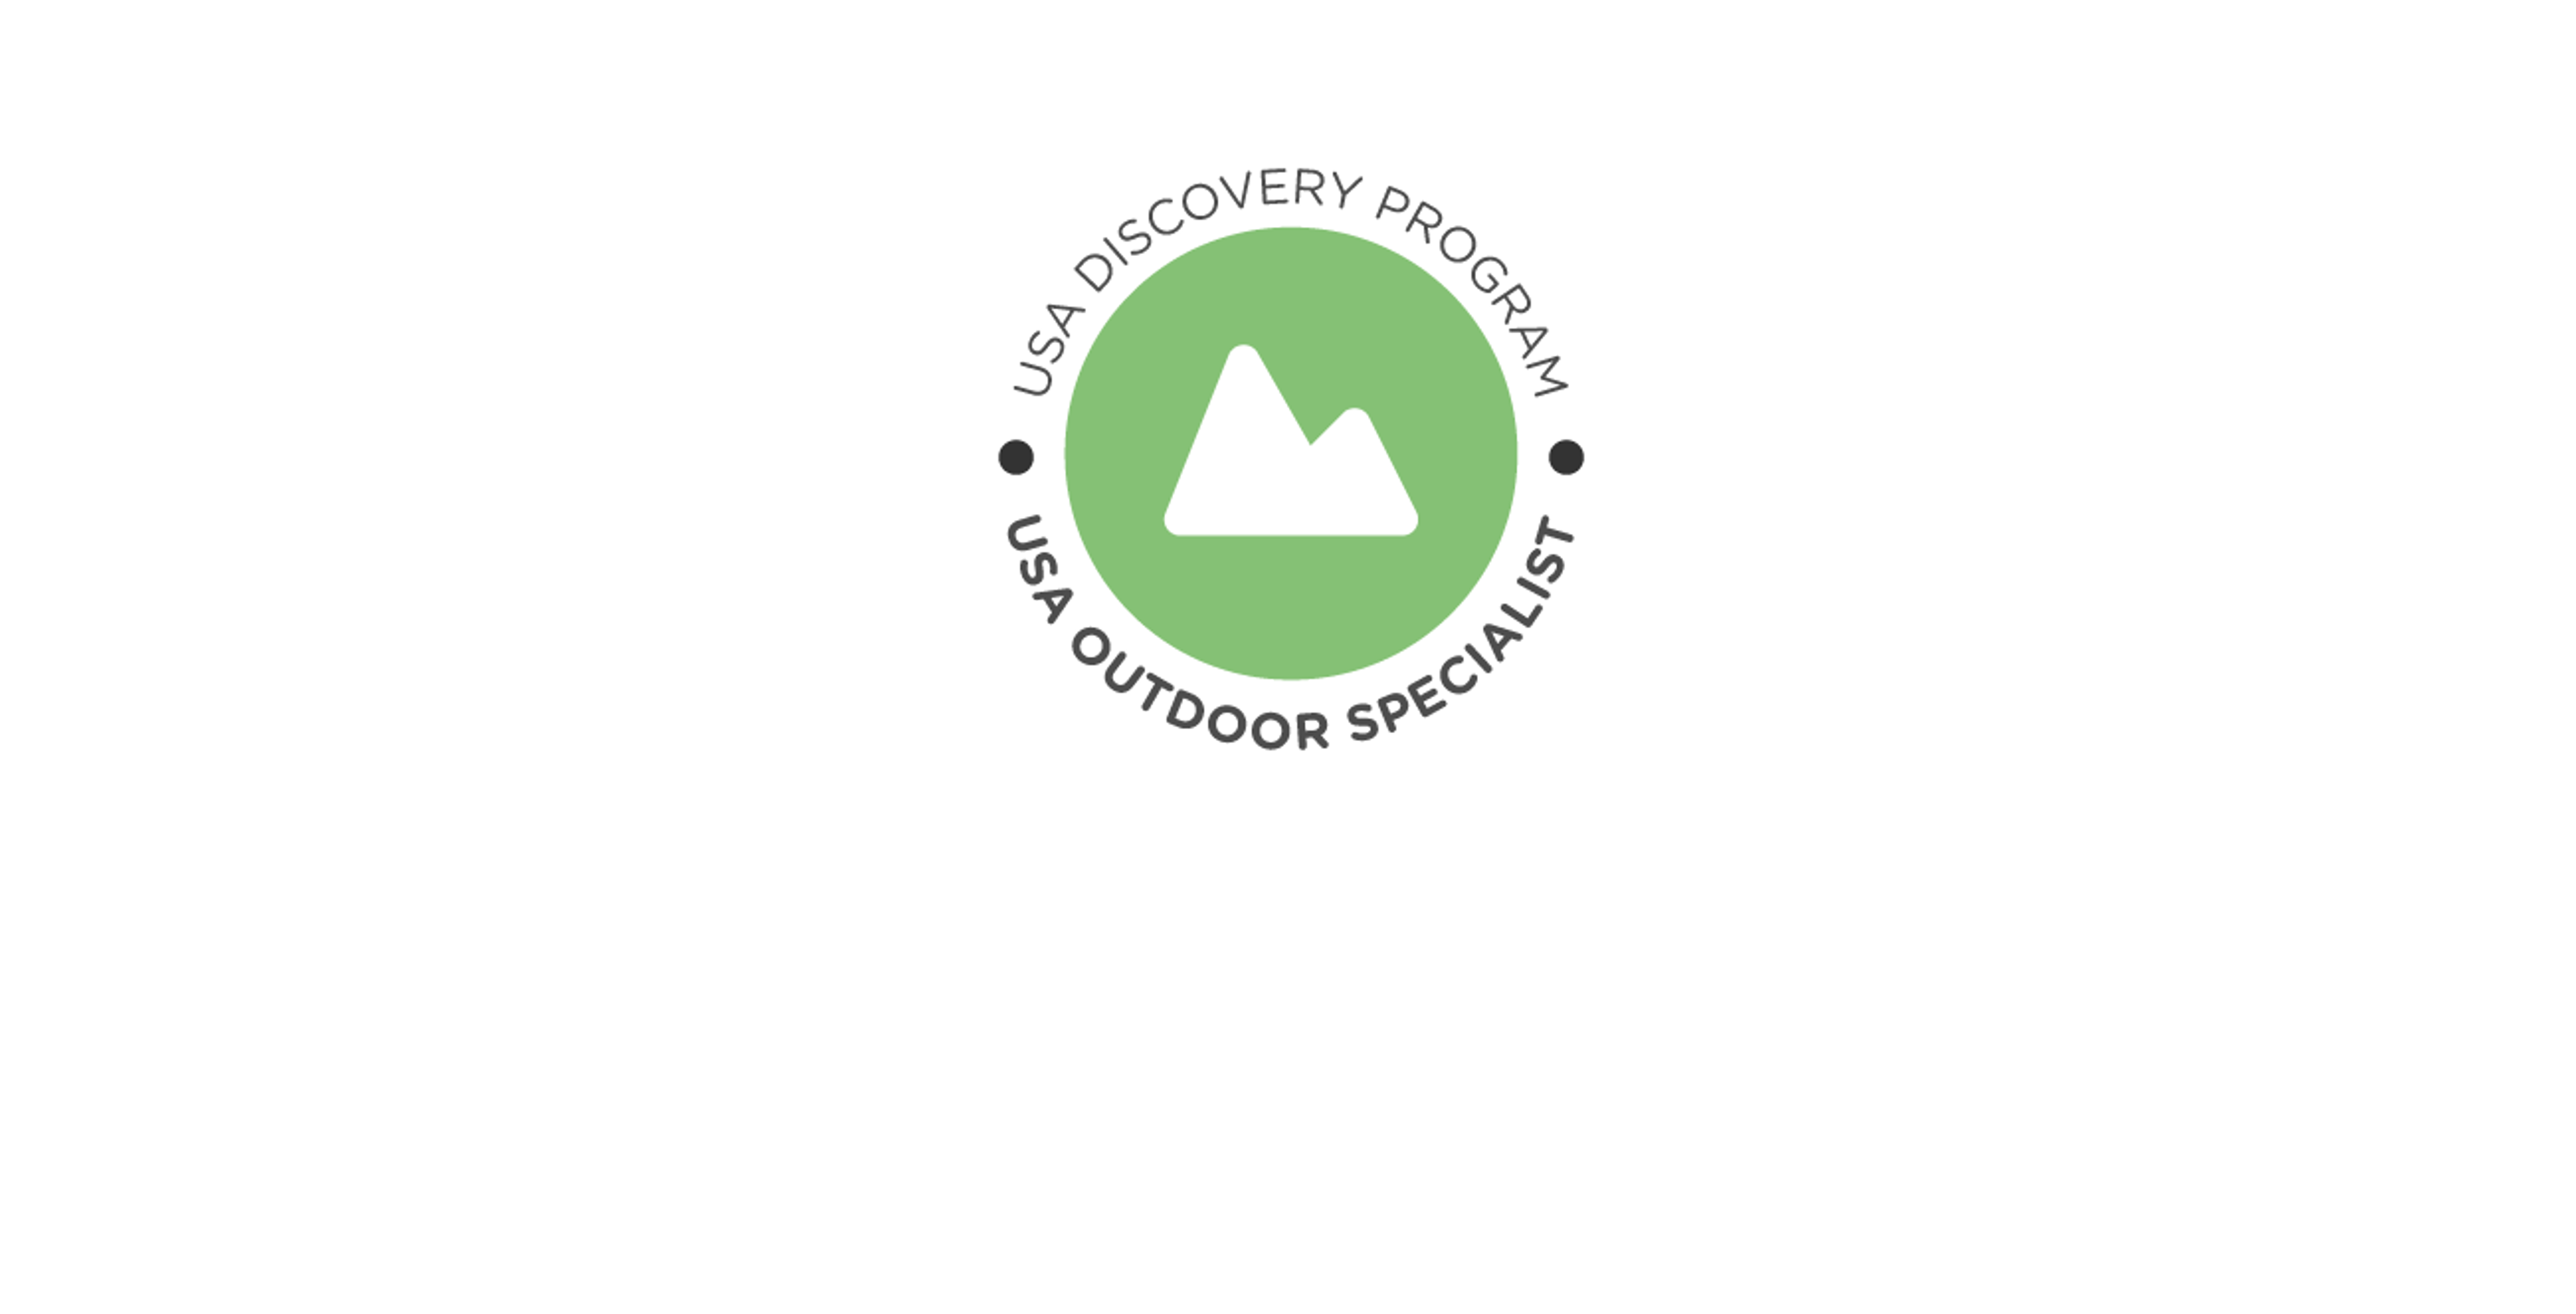 Outdoors badge